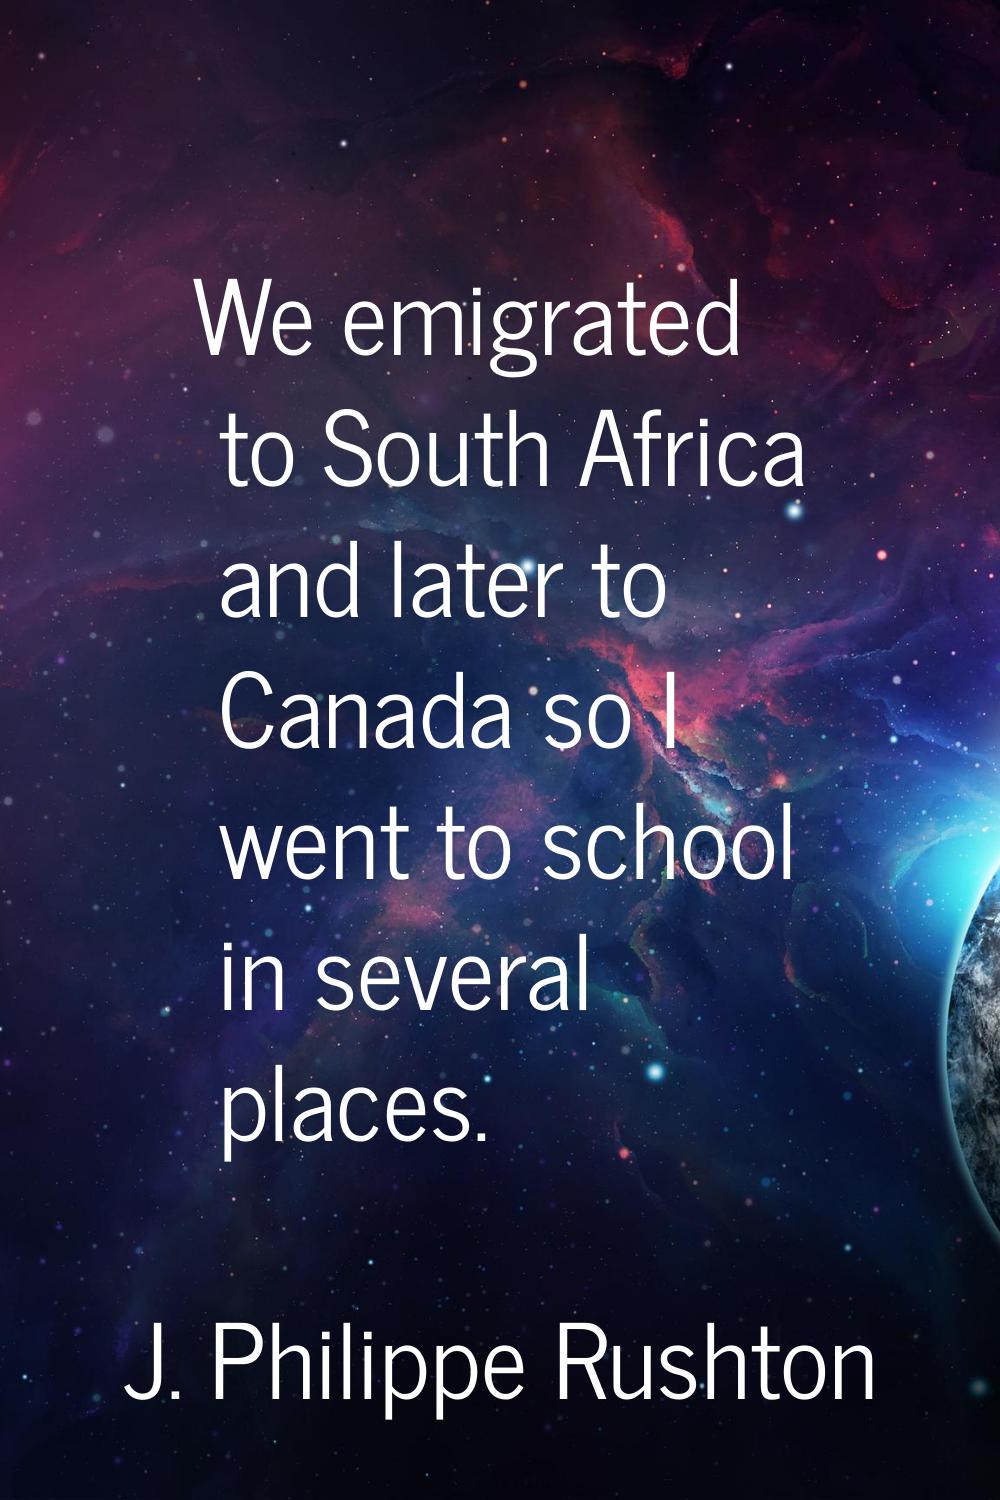 We emigrated to South Africa and later to Canada so I went to school in several places.